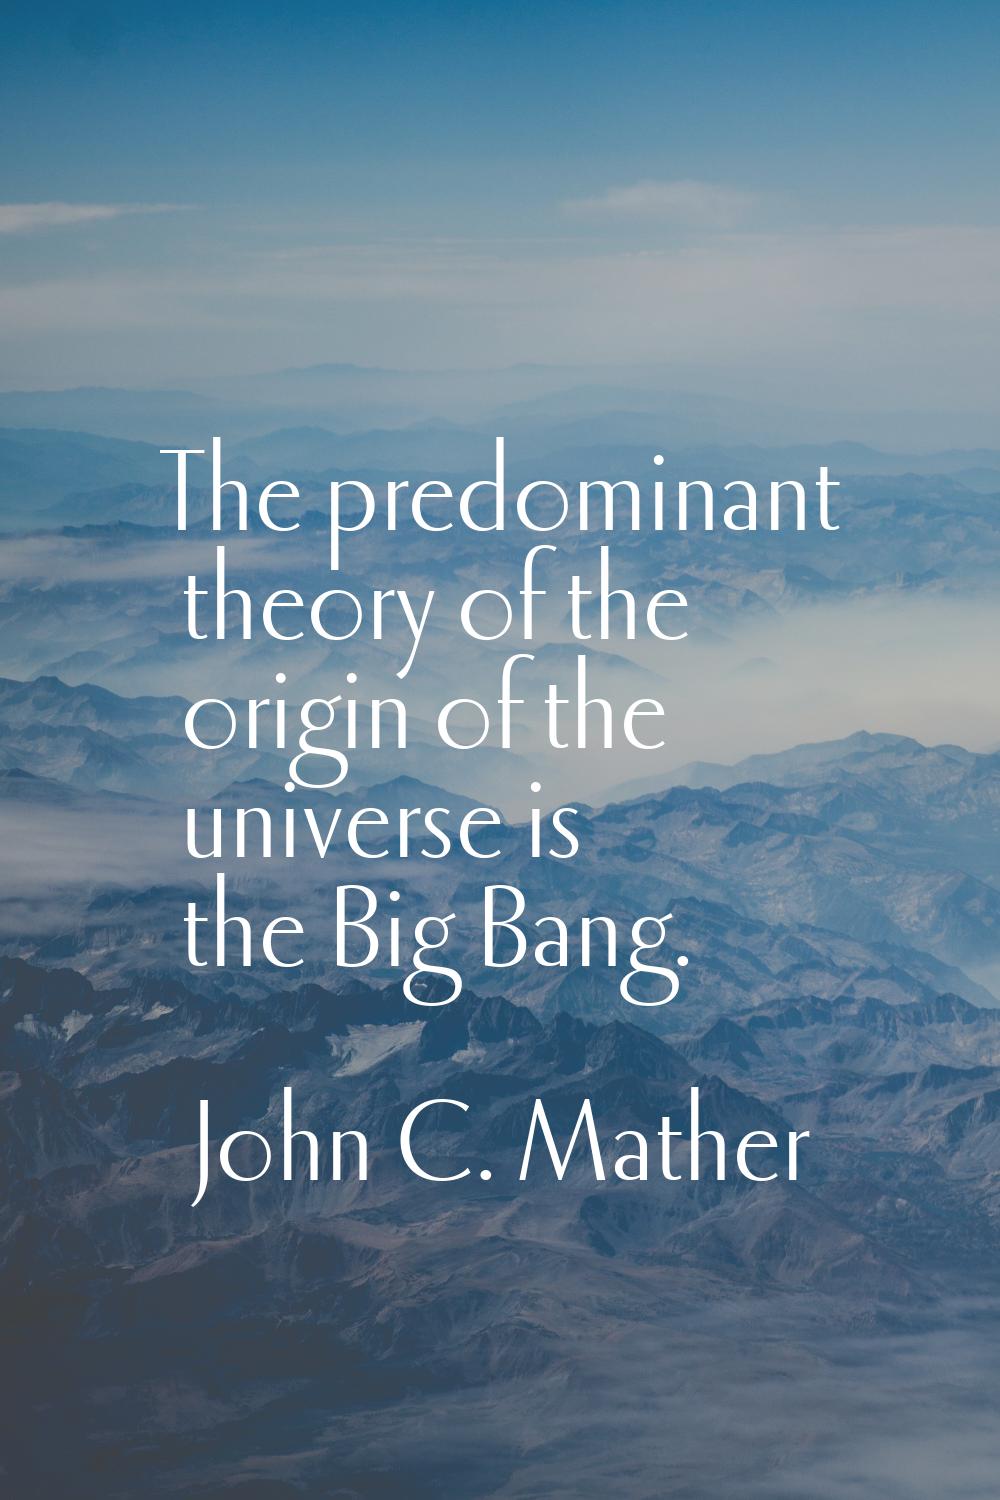 The predominant theory of the origin of the universe is the Big Bang.